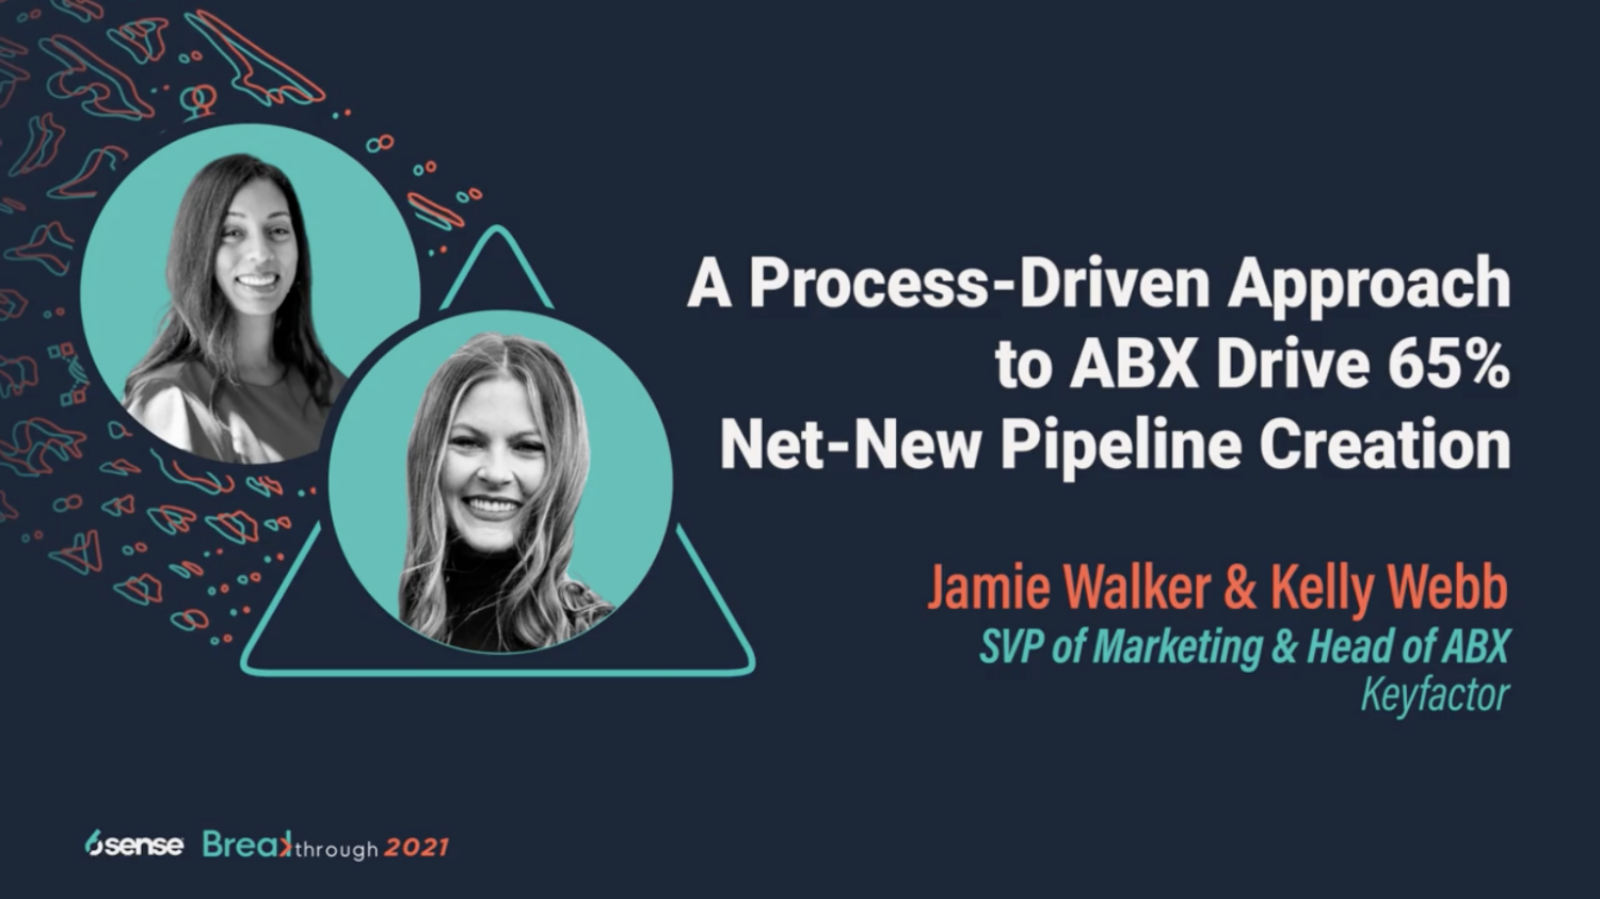 A Process-Driven Approach to ABX Drives 65% Net-New Pipeline Creation